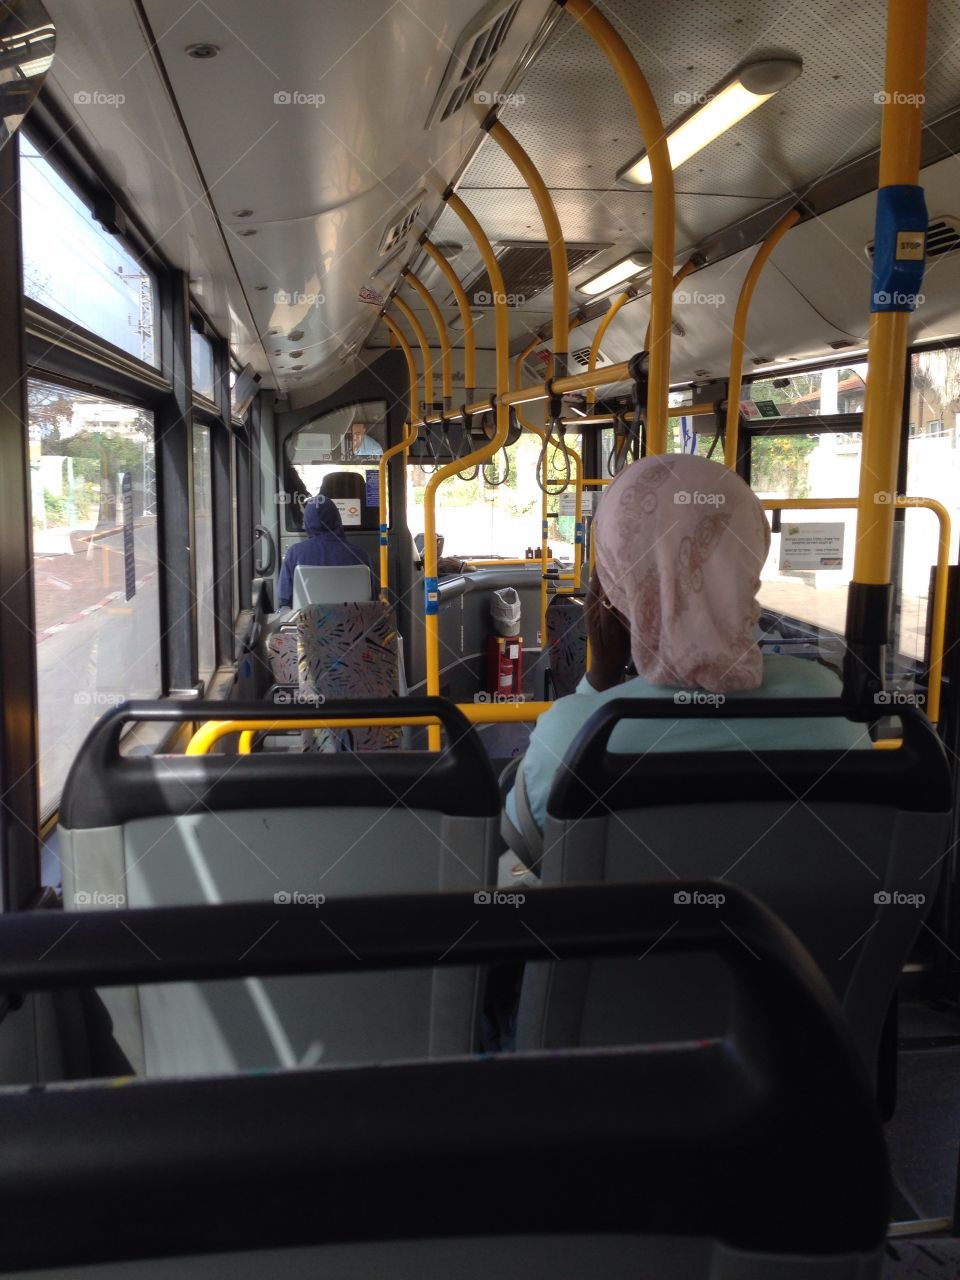 A woman in the bus 